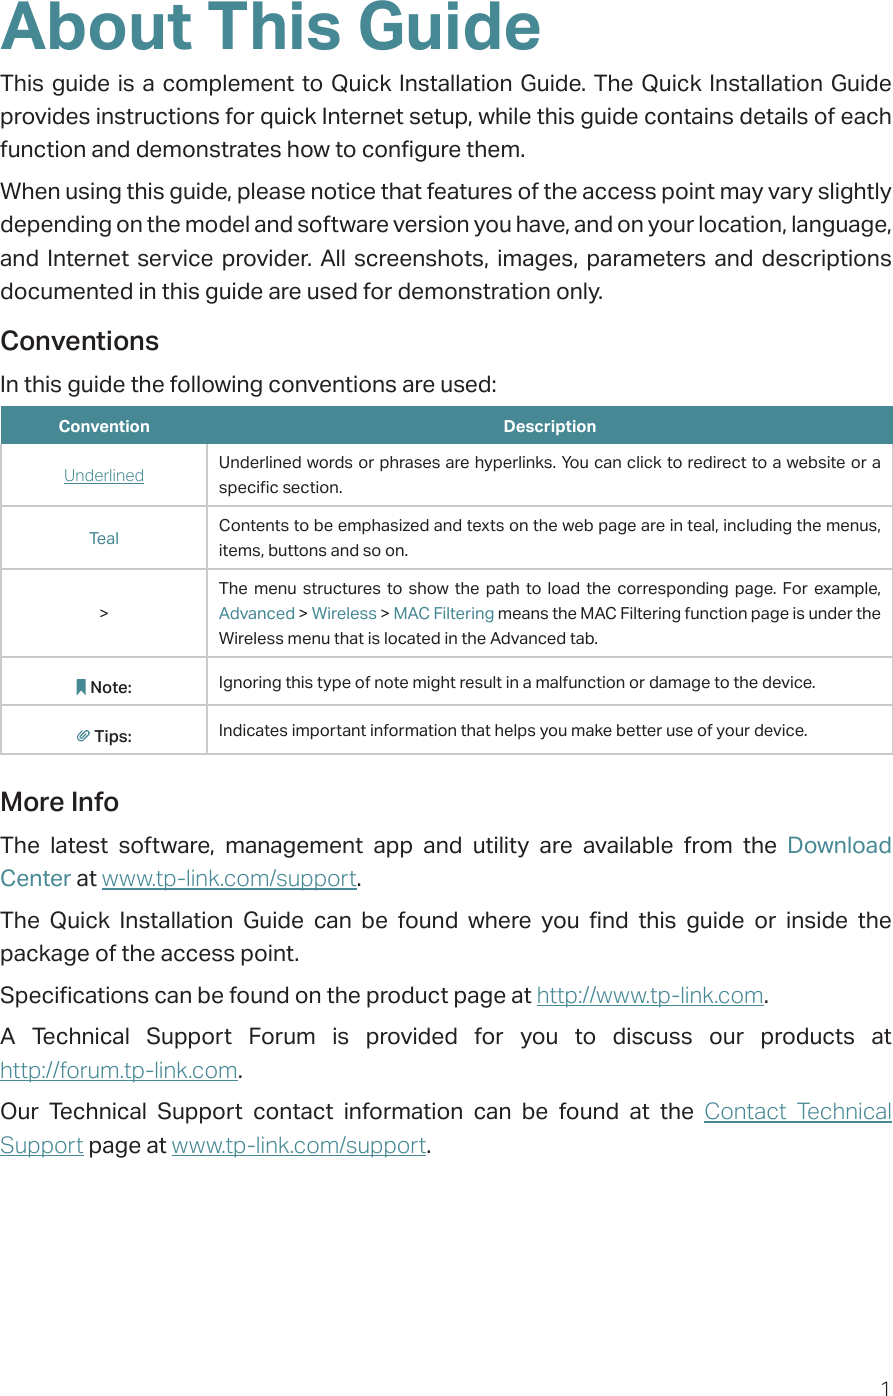 1About This GuideThis guide is a complement to Quick Installation Guide. The Quick Installation Guide provides instructions for quick Internet setup, while this guide contains details of each function and demonstrates how to configure them. When using this guide, please notice that features of the access point may vary slightly depending on the model and software version you have, and on your location, language, and Internet service provider. All screenshots, images, parameters and descriptions documented in this guide are used for demonstration only.ConventionsIn this guide the following conventions are used:Convention DescriptionUnderlined Underlined words or phrases are hyperlinks. You can click to redirect to a website or a specific section.Teal Contents to be emphasized and texts on the web page are in teal, including the menus, items, buttons and so on.&gt;The menu structures to show the path to load the corresponding page. For example, Advanced &gt; Wireless &gt; MAC Filtering means the MAC Filtering function page is under the Wireless menu that is located in the Advanced tab.Note: Ignoring this type of note might result in a malfunction or damage to the device.Tips: Indicates important information that helps you make better use of your device.More InfoThe latest software, management app and utility are available from the Download Center at www.tp-link.com/support.The Quick Installation Guide can be found where you find this guide or inside the package of the access point.Specifications can be found on the product page at http://www.tp-link.com.A Technical Support Forum is provided for you to discuss our products at  http://forum.tp-link.com.Our Technical Support contact information can be found at the Contact Technical Support page at www.tp-link.com/support.